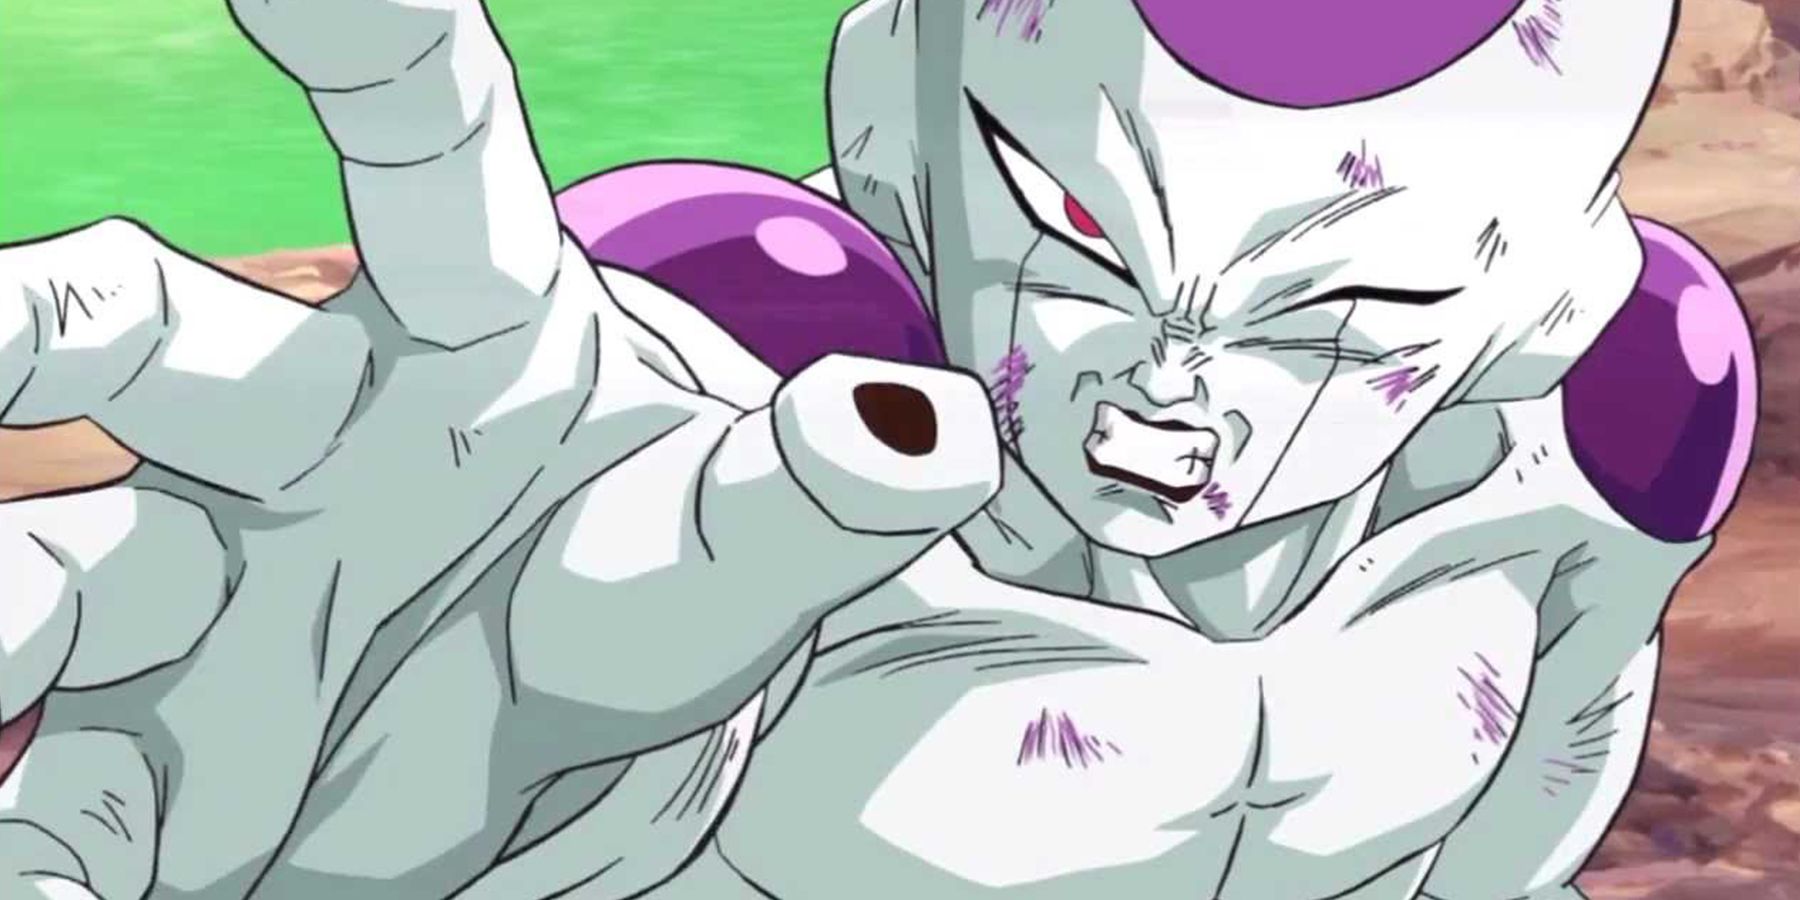 Frieza from the Dragon Ball anime series.